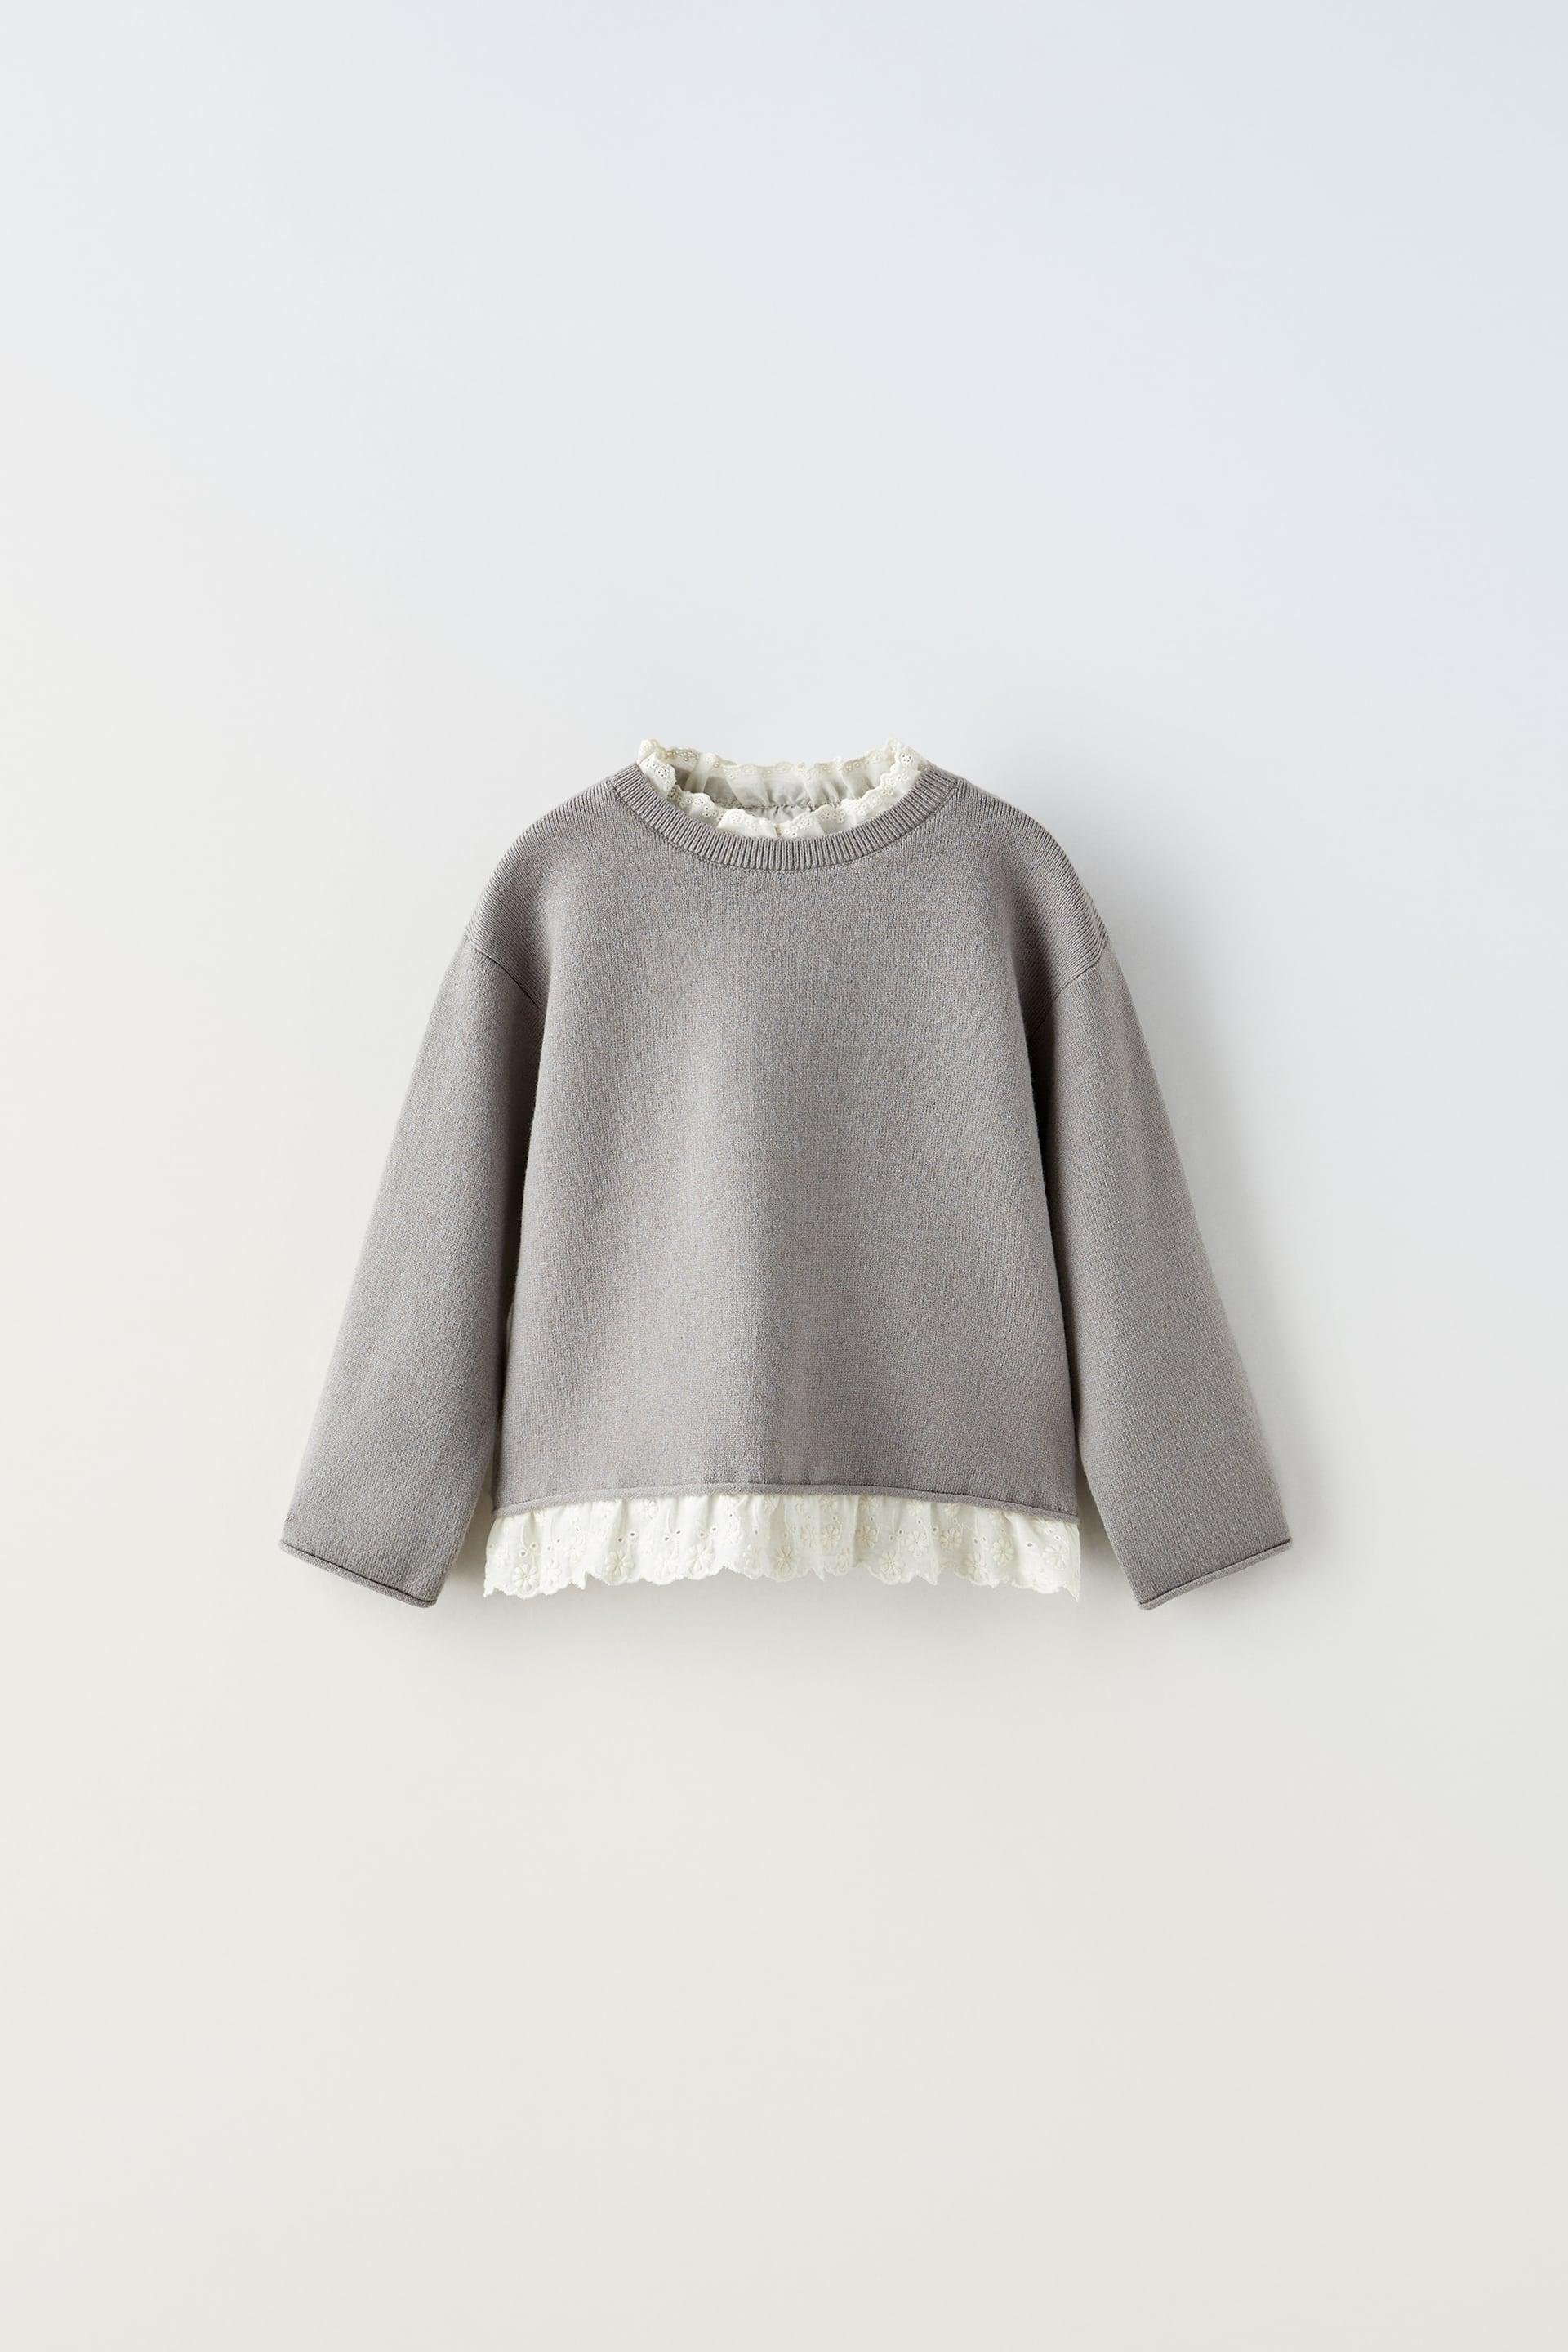 EMBROIDERED KNIT SWEATER by ZARA